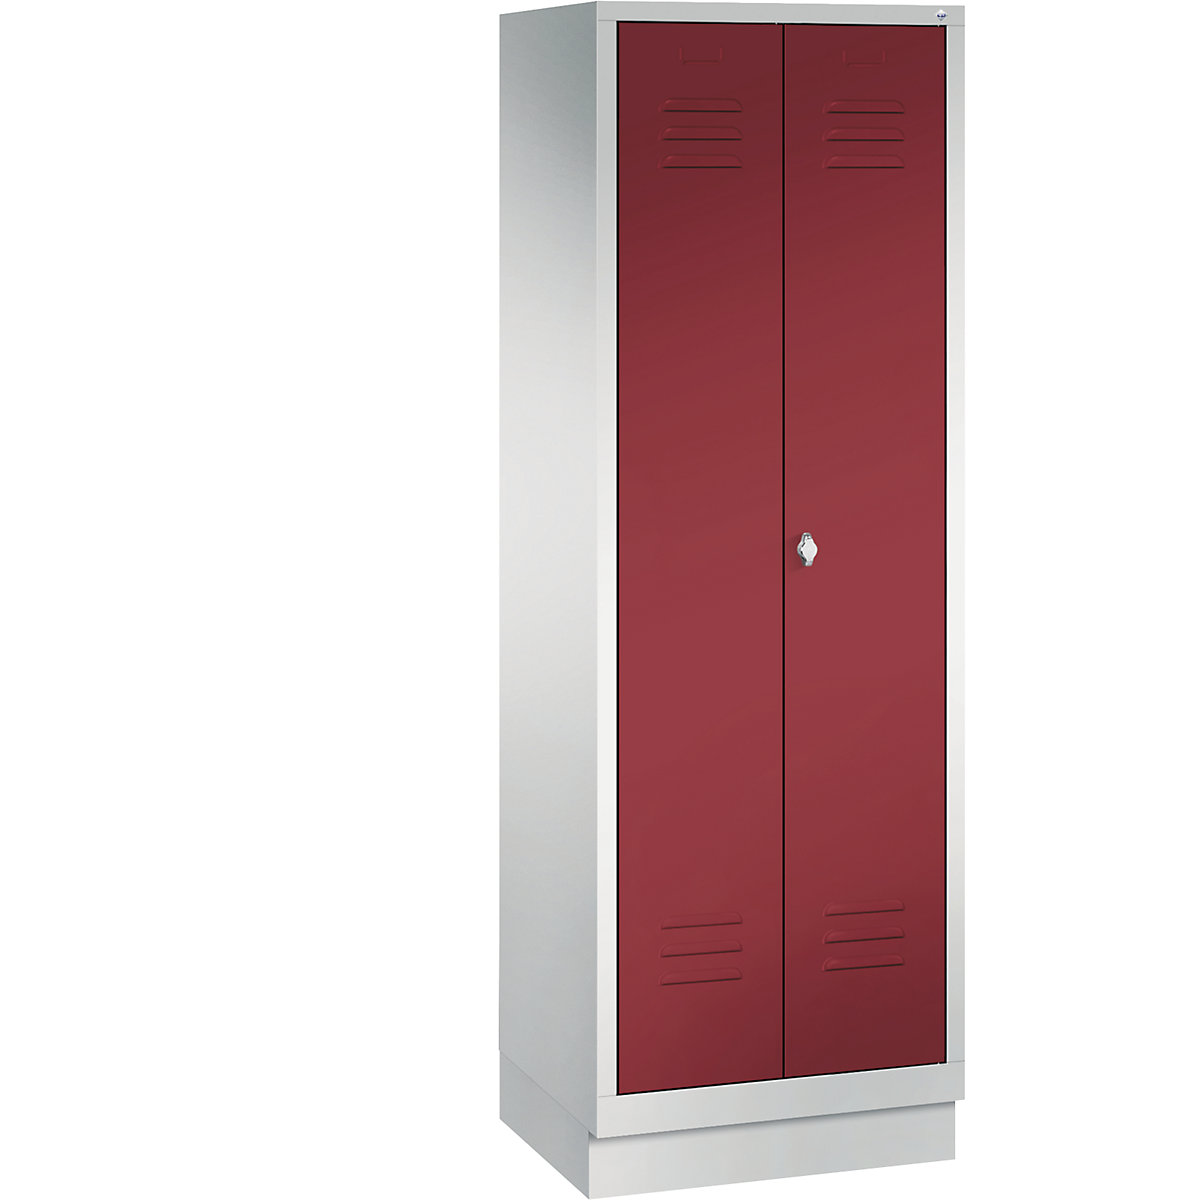 CLASSIC cloakroom locker with plinth, doors close in the middle – C+P, 2 compartments, compartment width 300 mm, light grey / ruby red-11